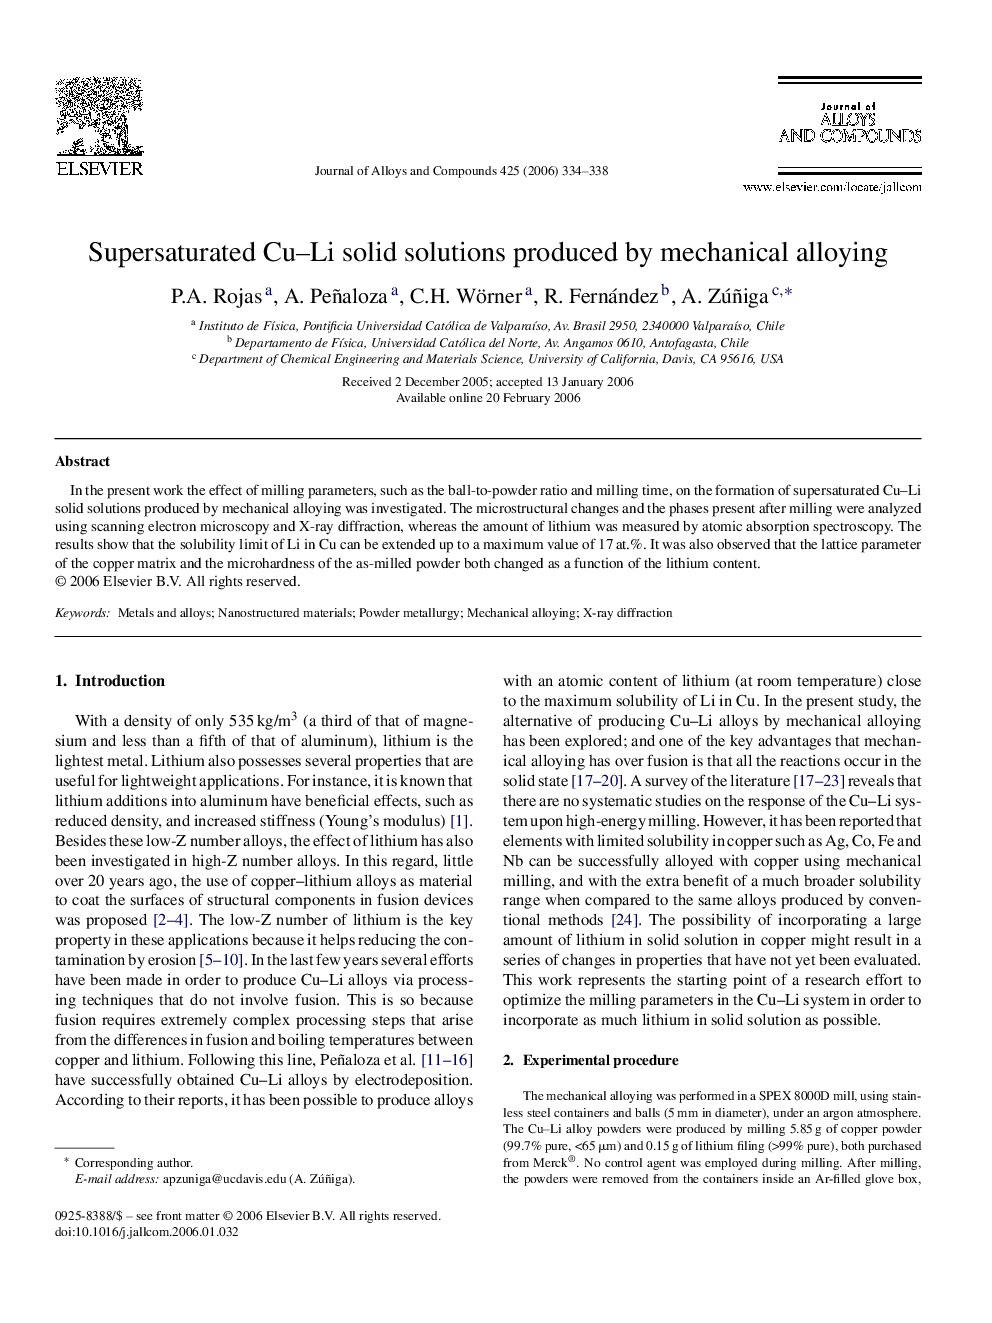 Supersaturated Cu-Li solid solutions produced by mechanical alloying